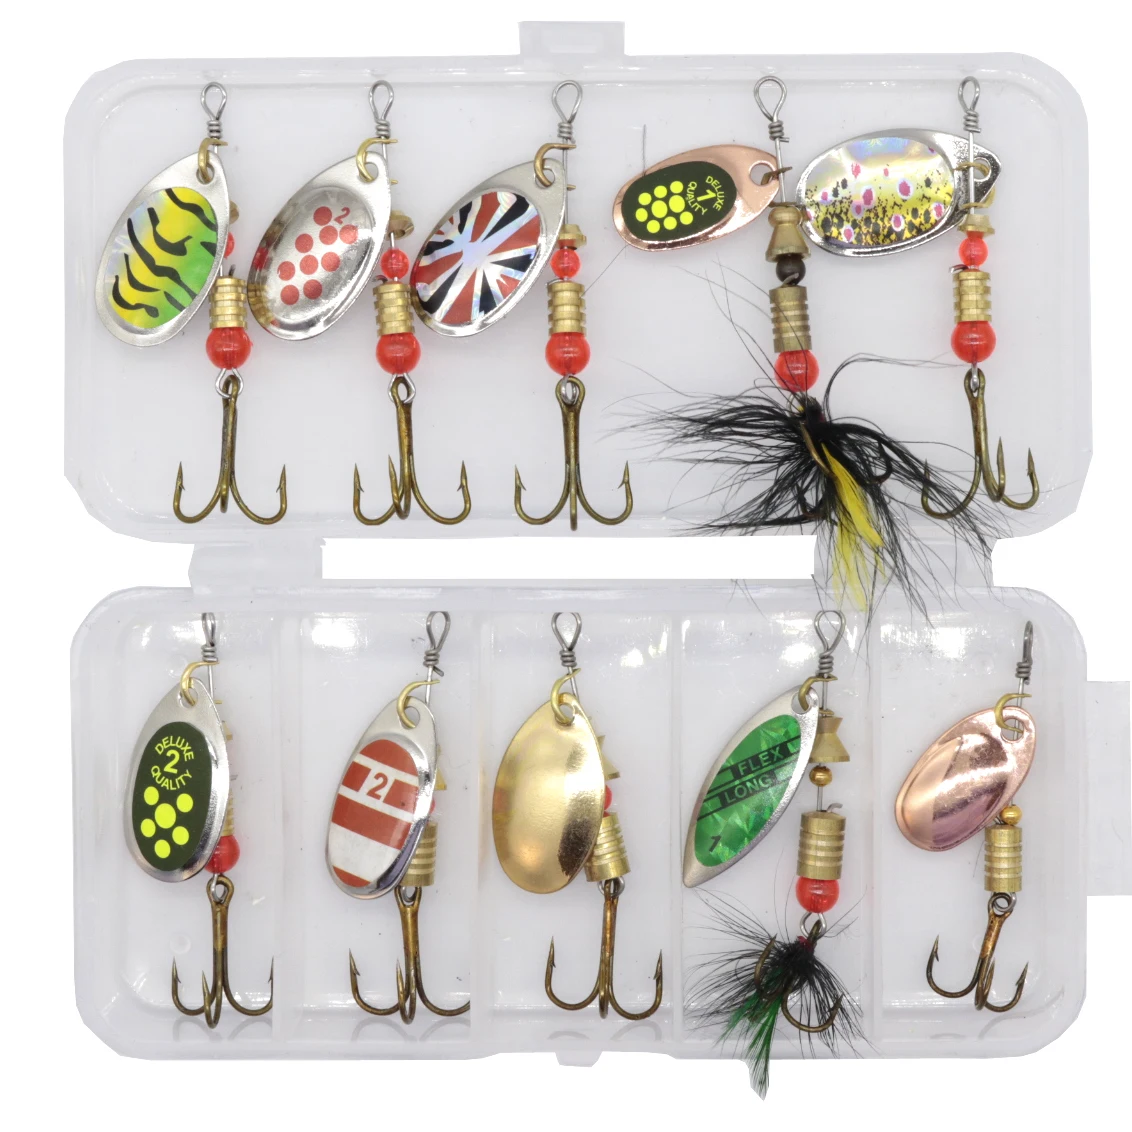 10pcs/lot LUSHAZER fishing spoon lures spinner bait 2.5-4g fishing wobbler metal baits spinnerbait isca artificial free with box Sadoun.com